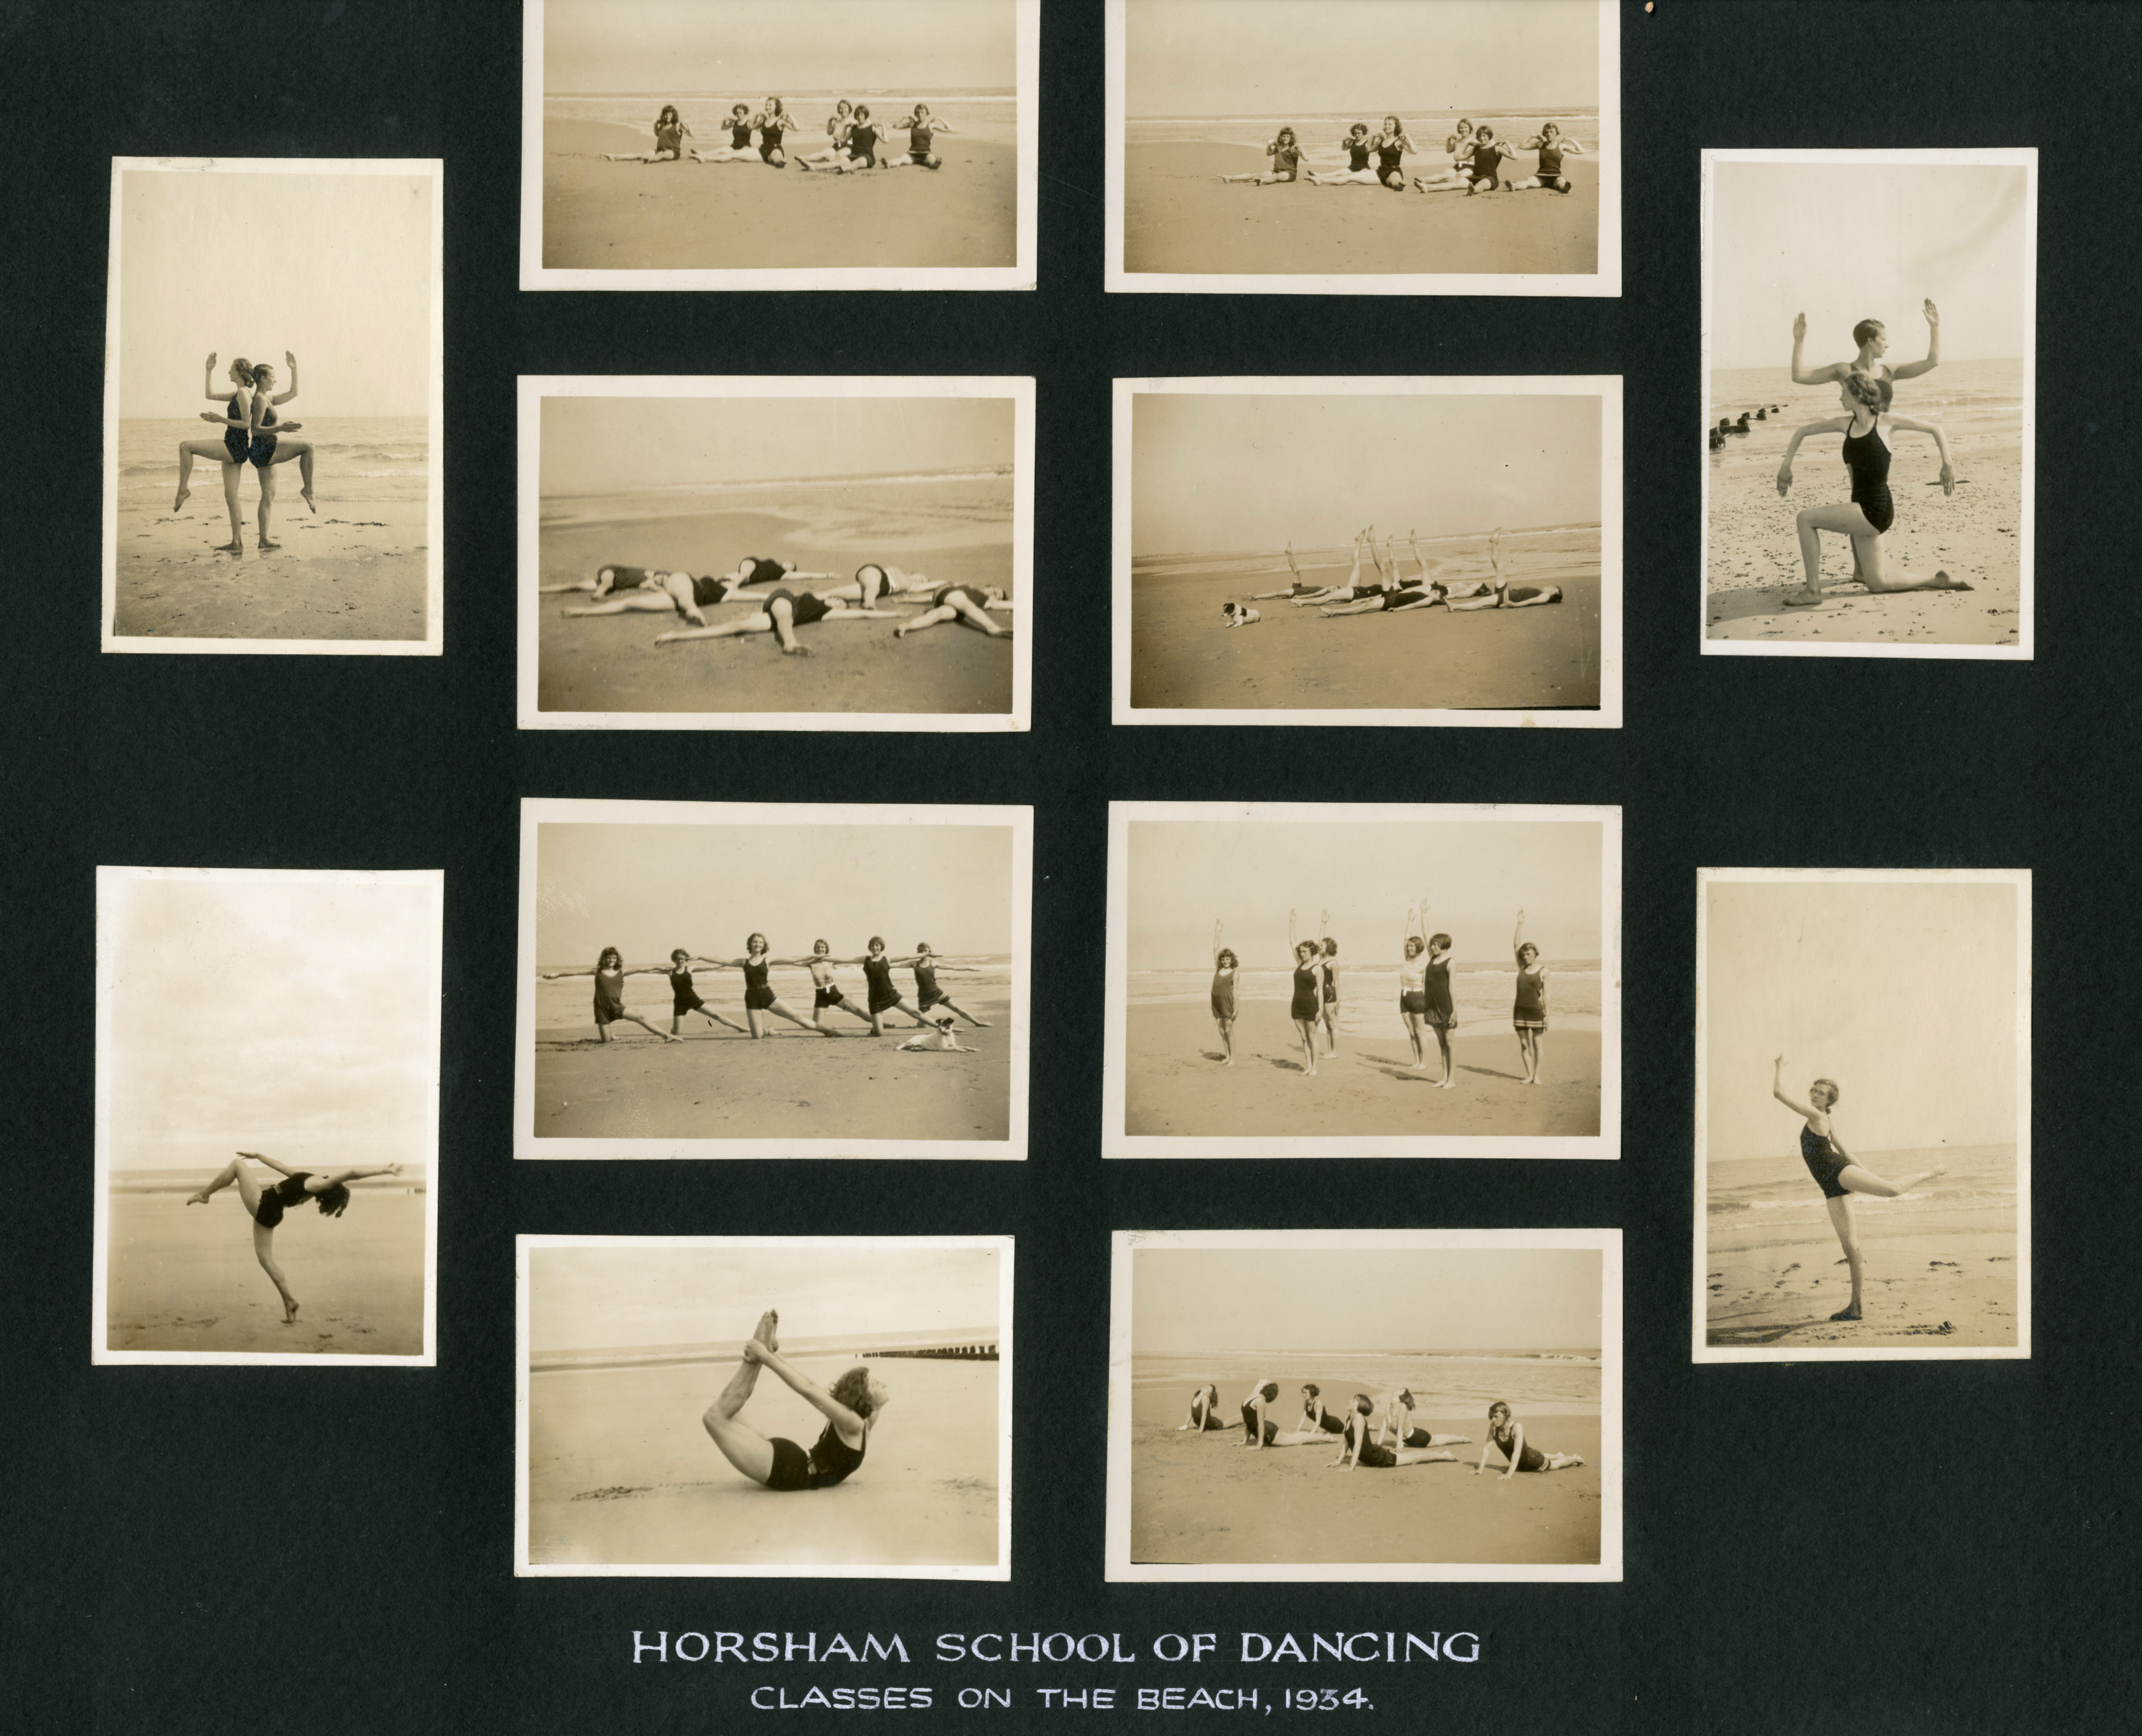 Photos from Horsham School of Dancing's 'Dancing on the beach' 1934